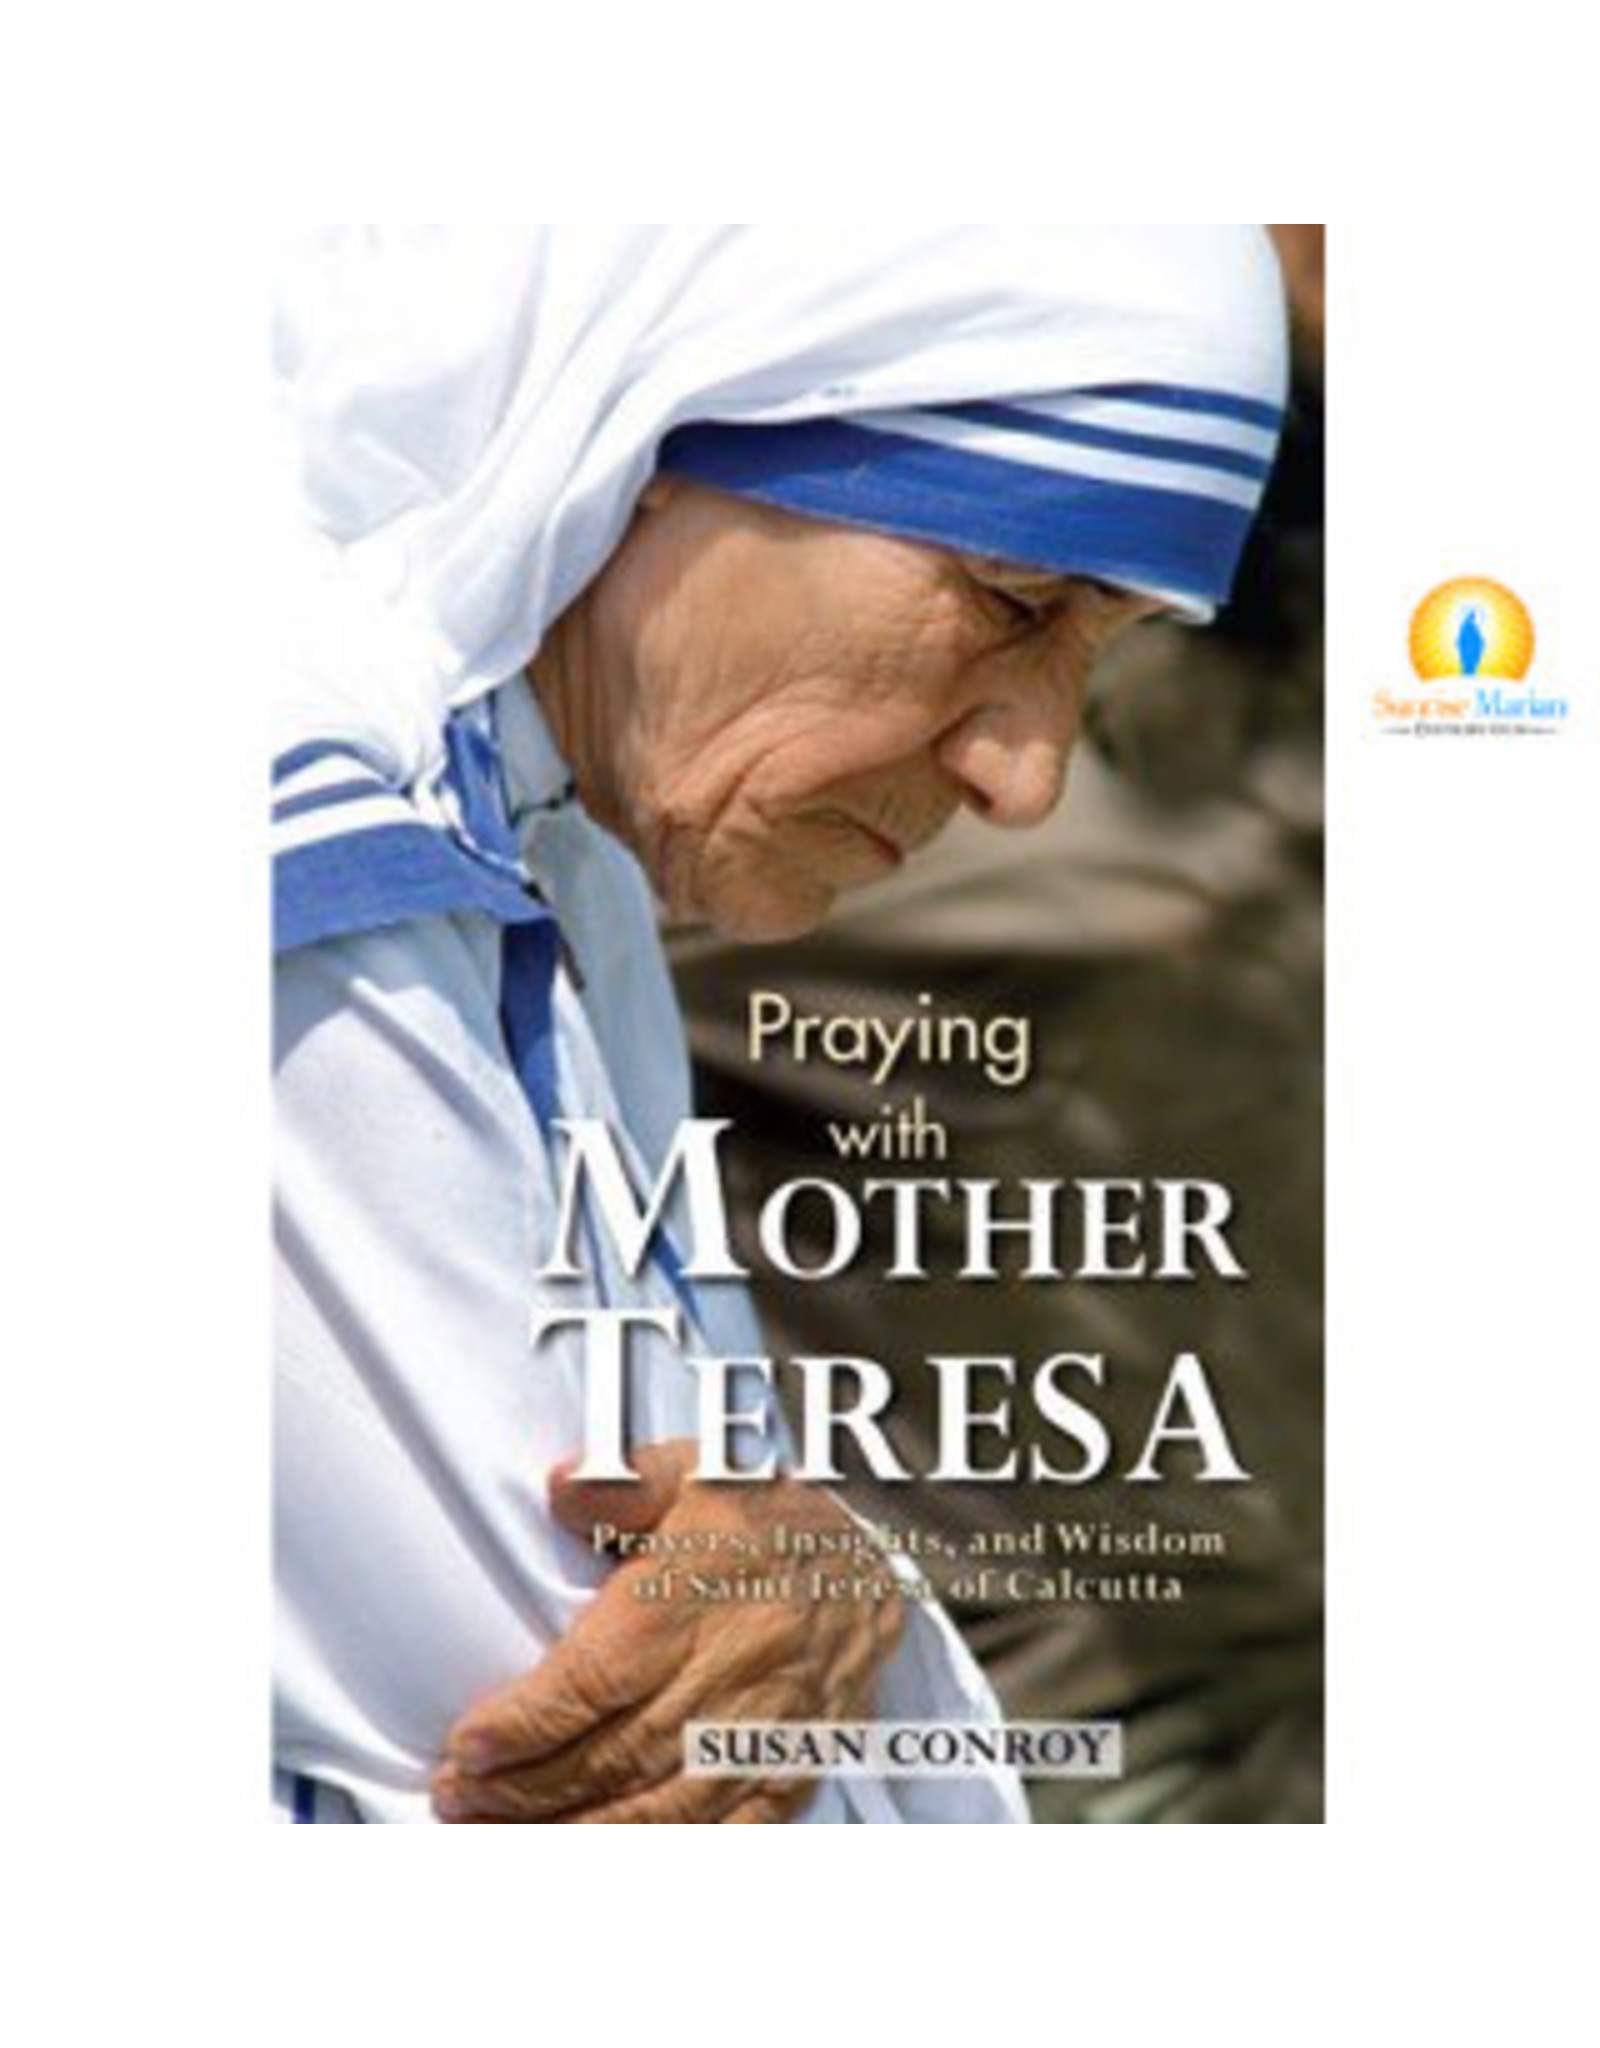 Association of Marian Helpers Praying with Mother Teresa: Prayers, Insights, and Wisdom of Saint Teresa of Calcutta by Susan Conroy (Paperback)